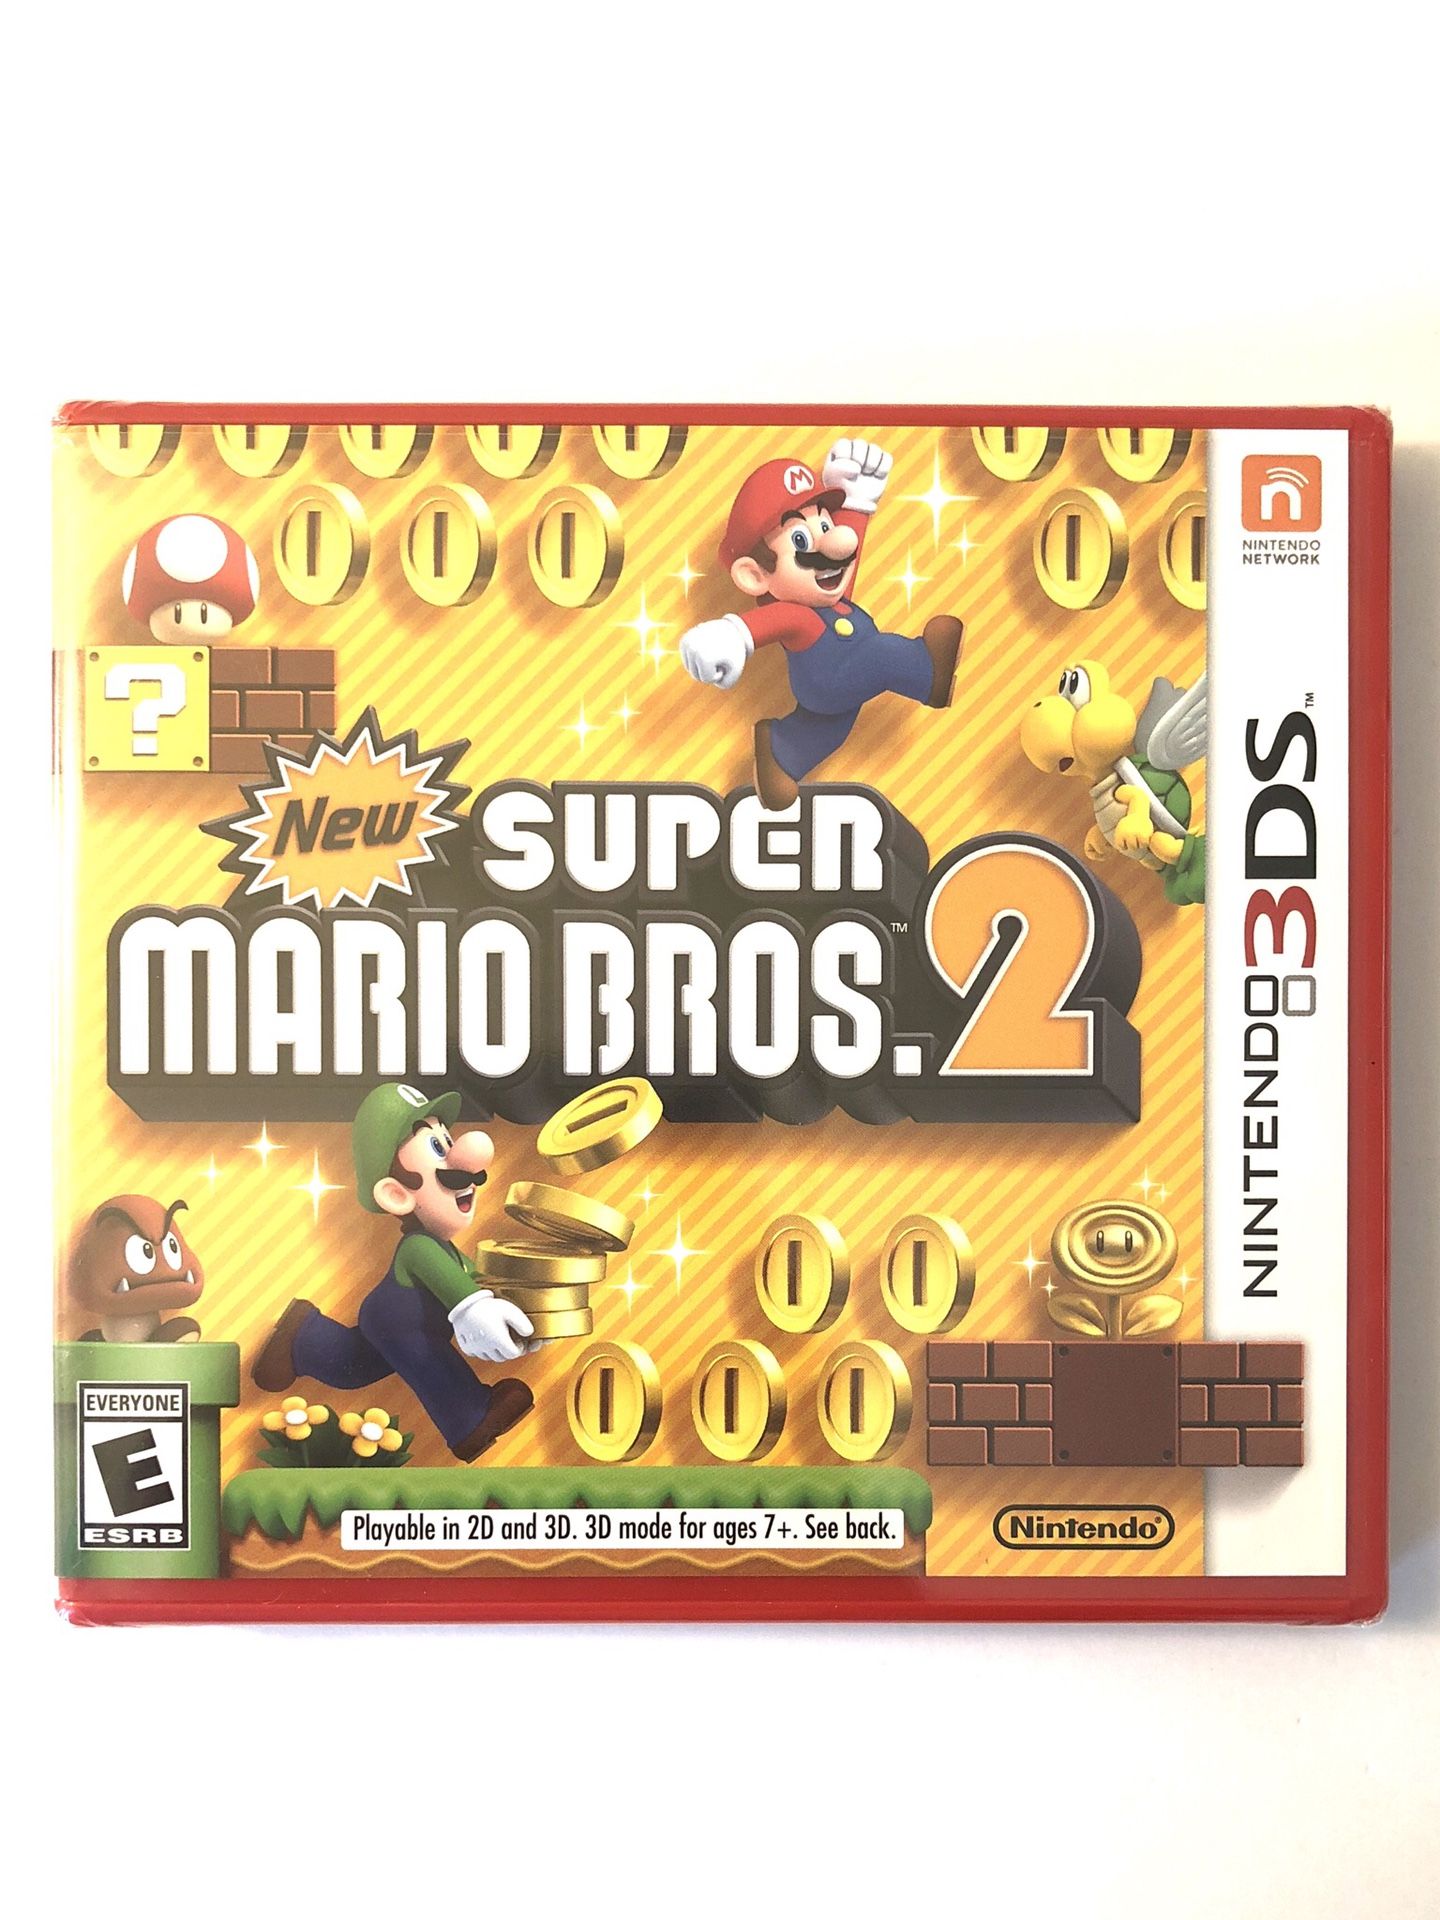 NEW SUPER MARIO BROS 2 FOR NINTENDO 3DS FACTORY SEALED VIDEO GAME